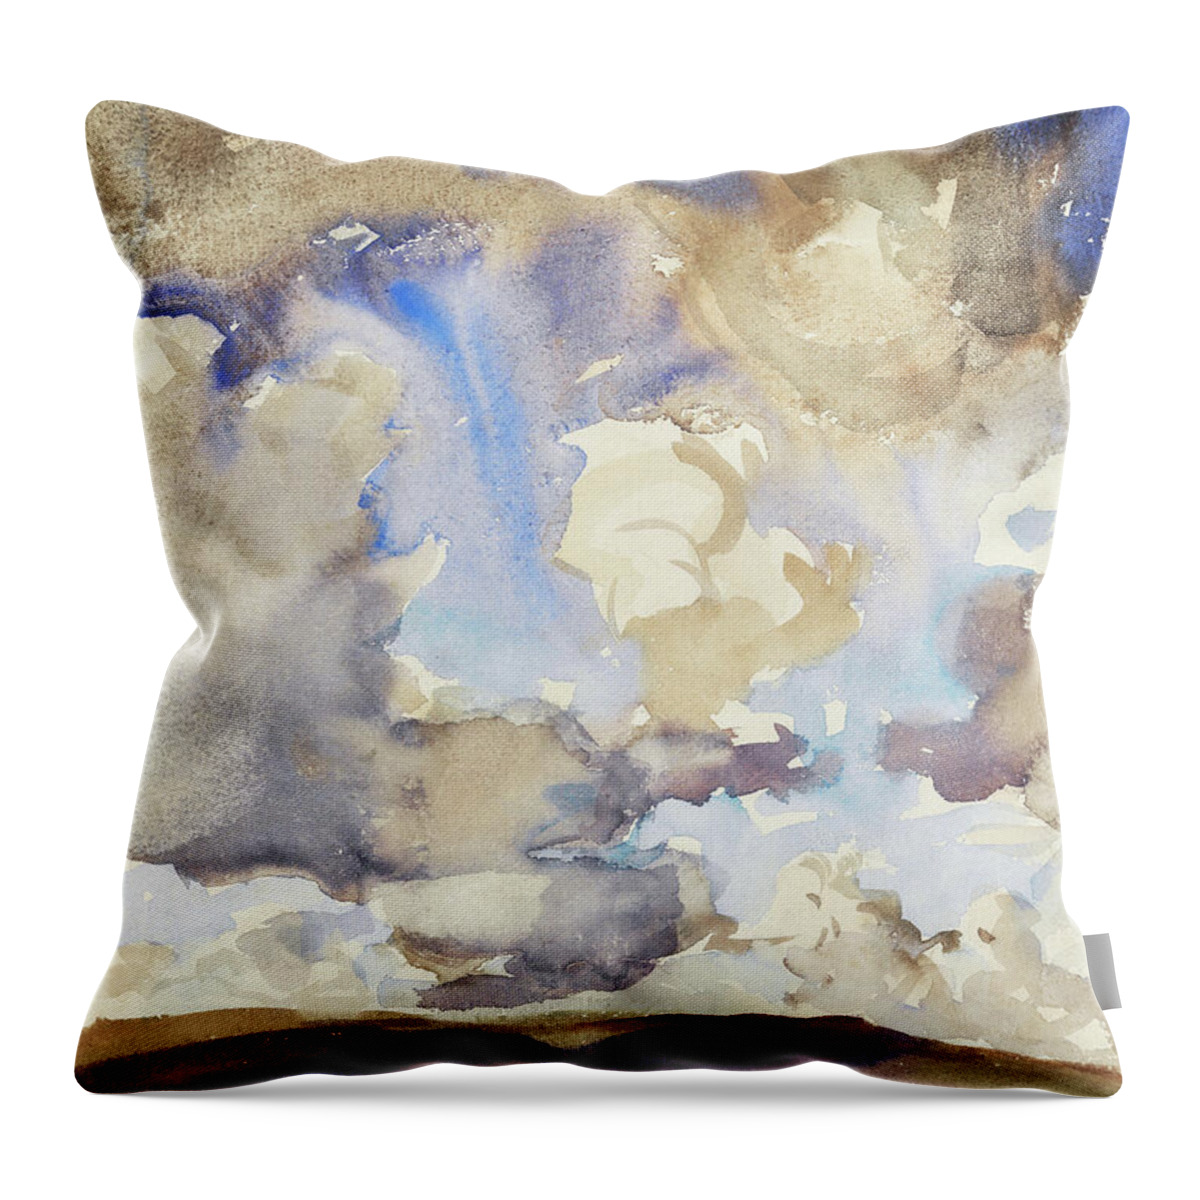 Clouds Throw Pillow featuring the painting Clouds by John Singer Sargent